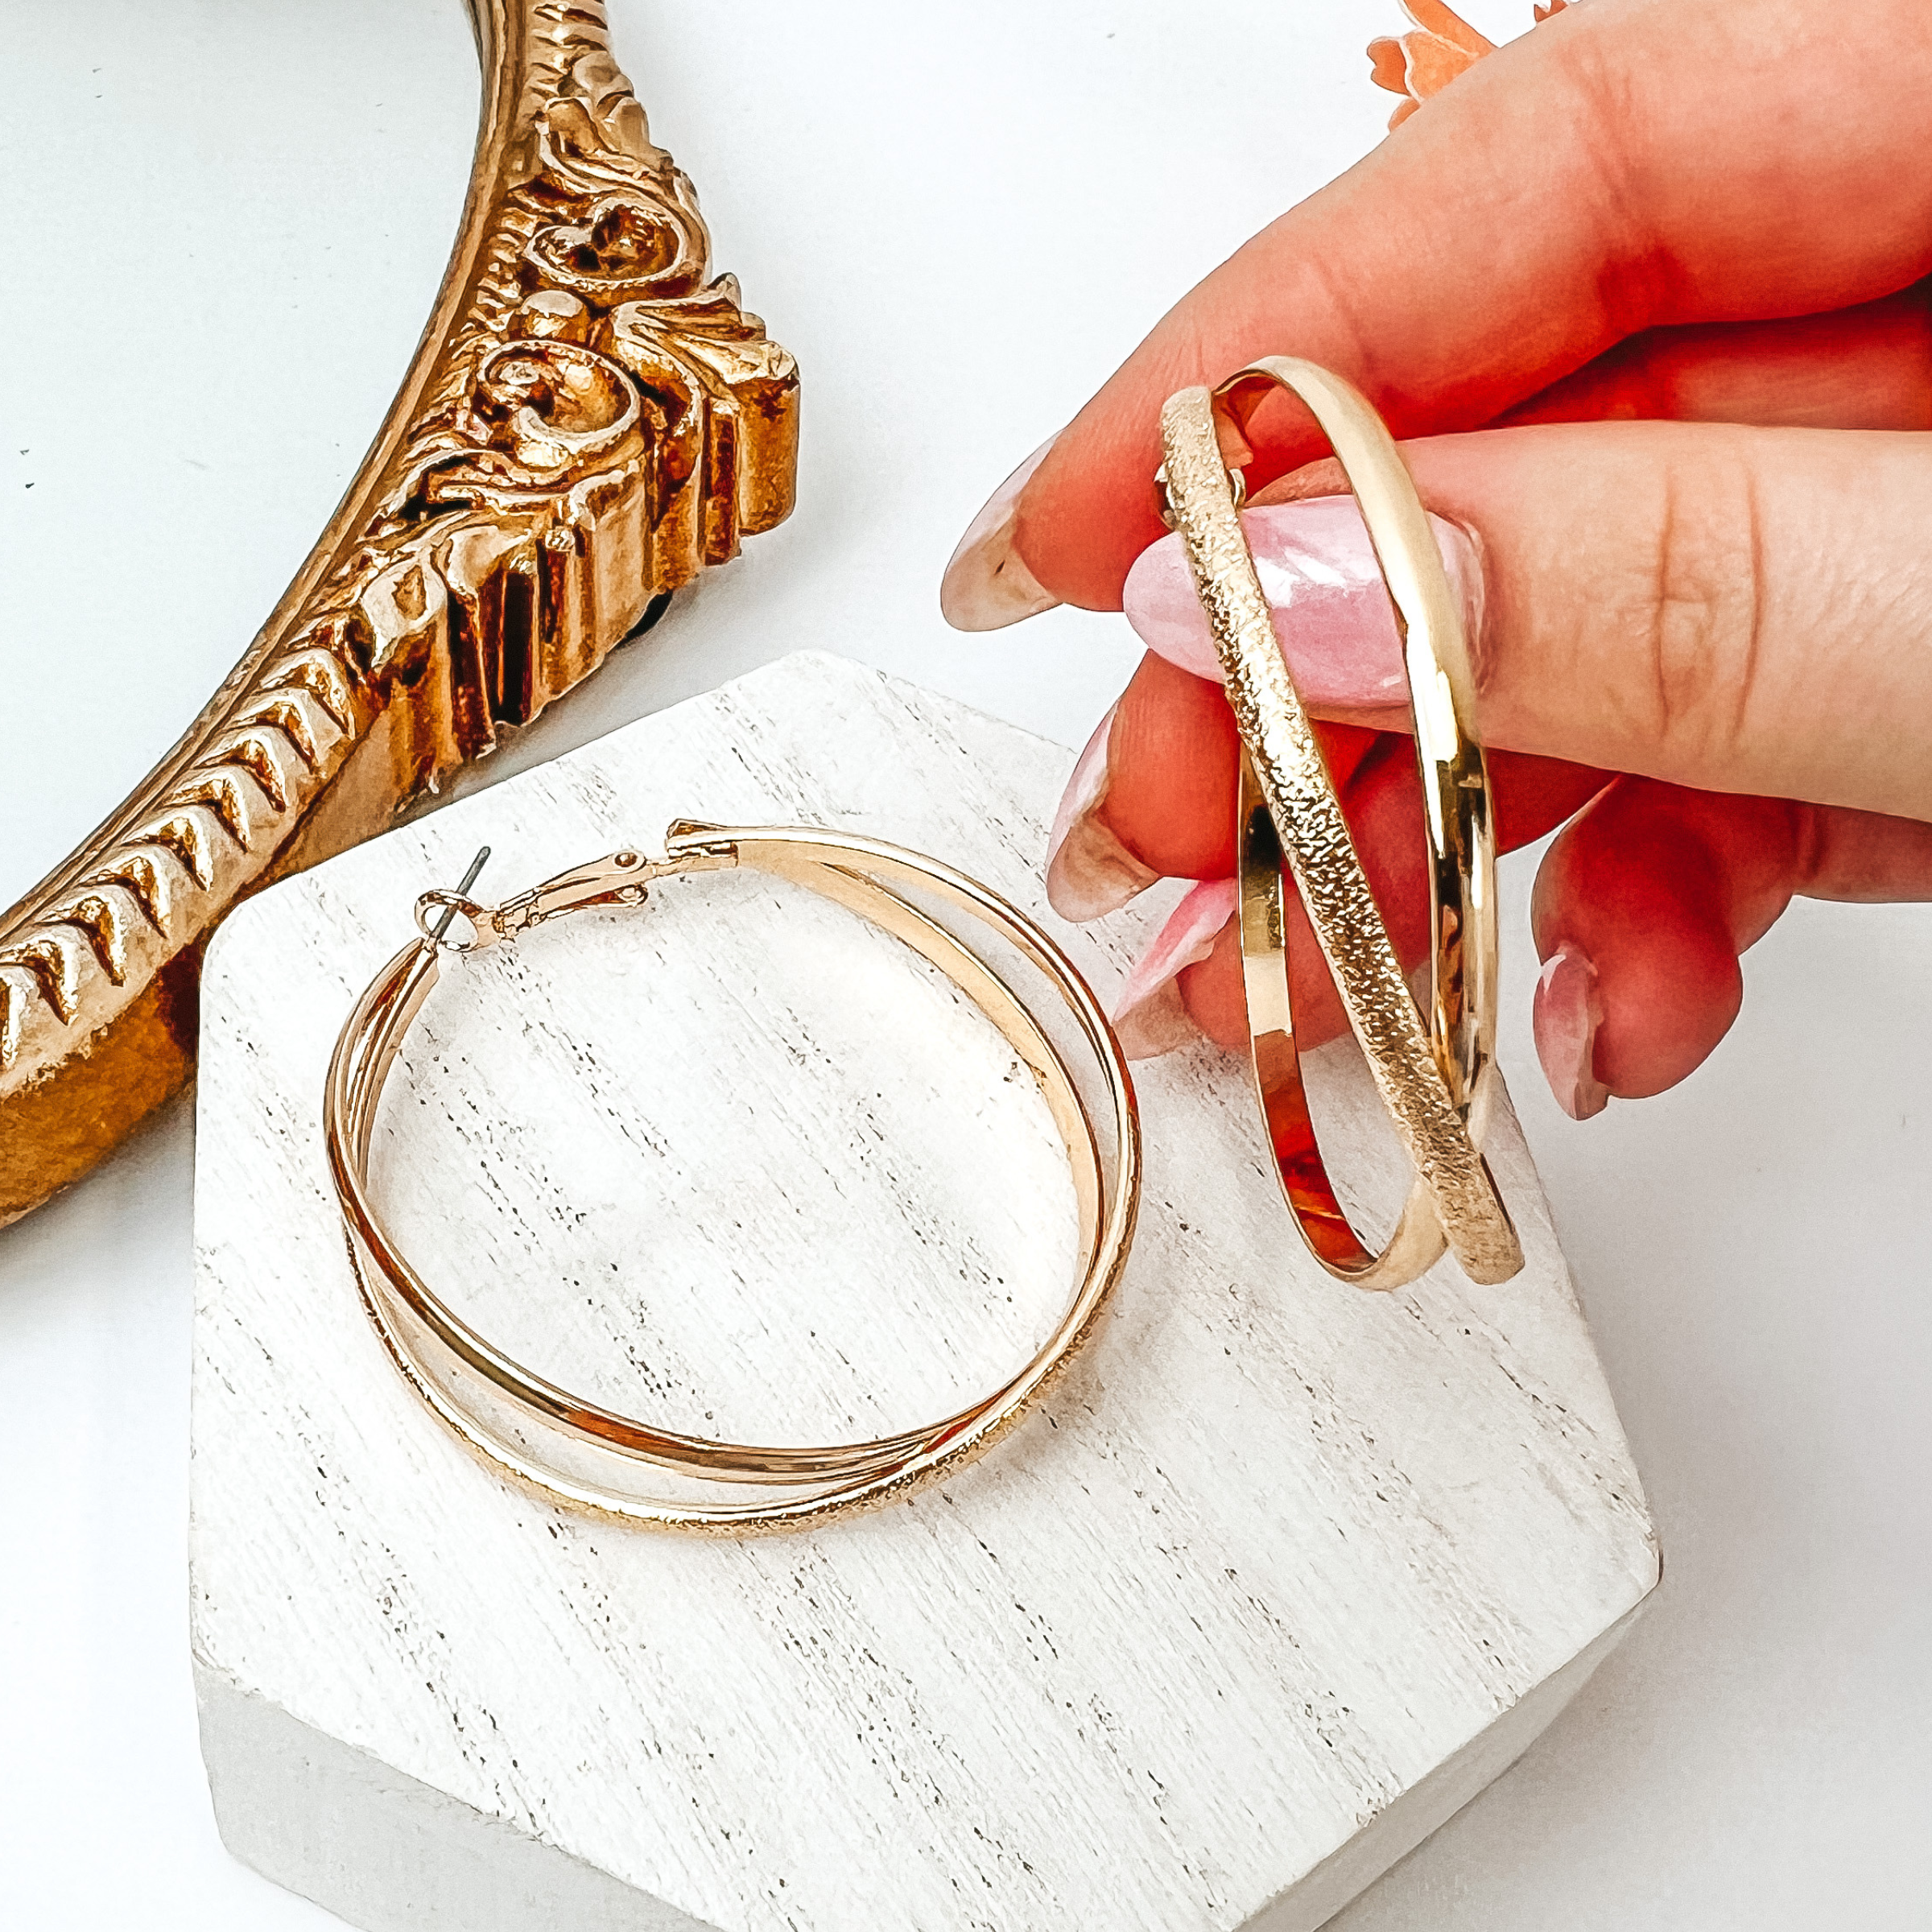 Double hoop earrings in gold. One hoop is gold and the other one is a texturized gold. One hoop is pictured on a white block while the other one is being held by a hand all on a white background. 